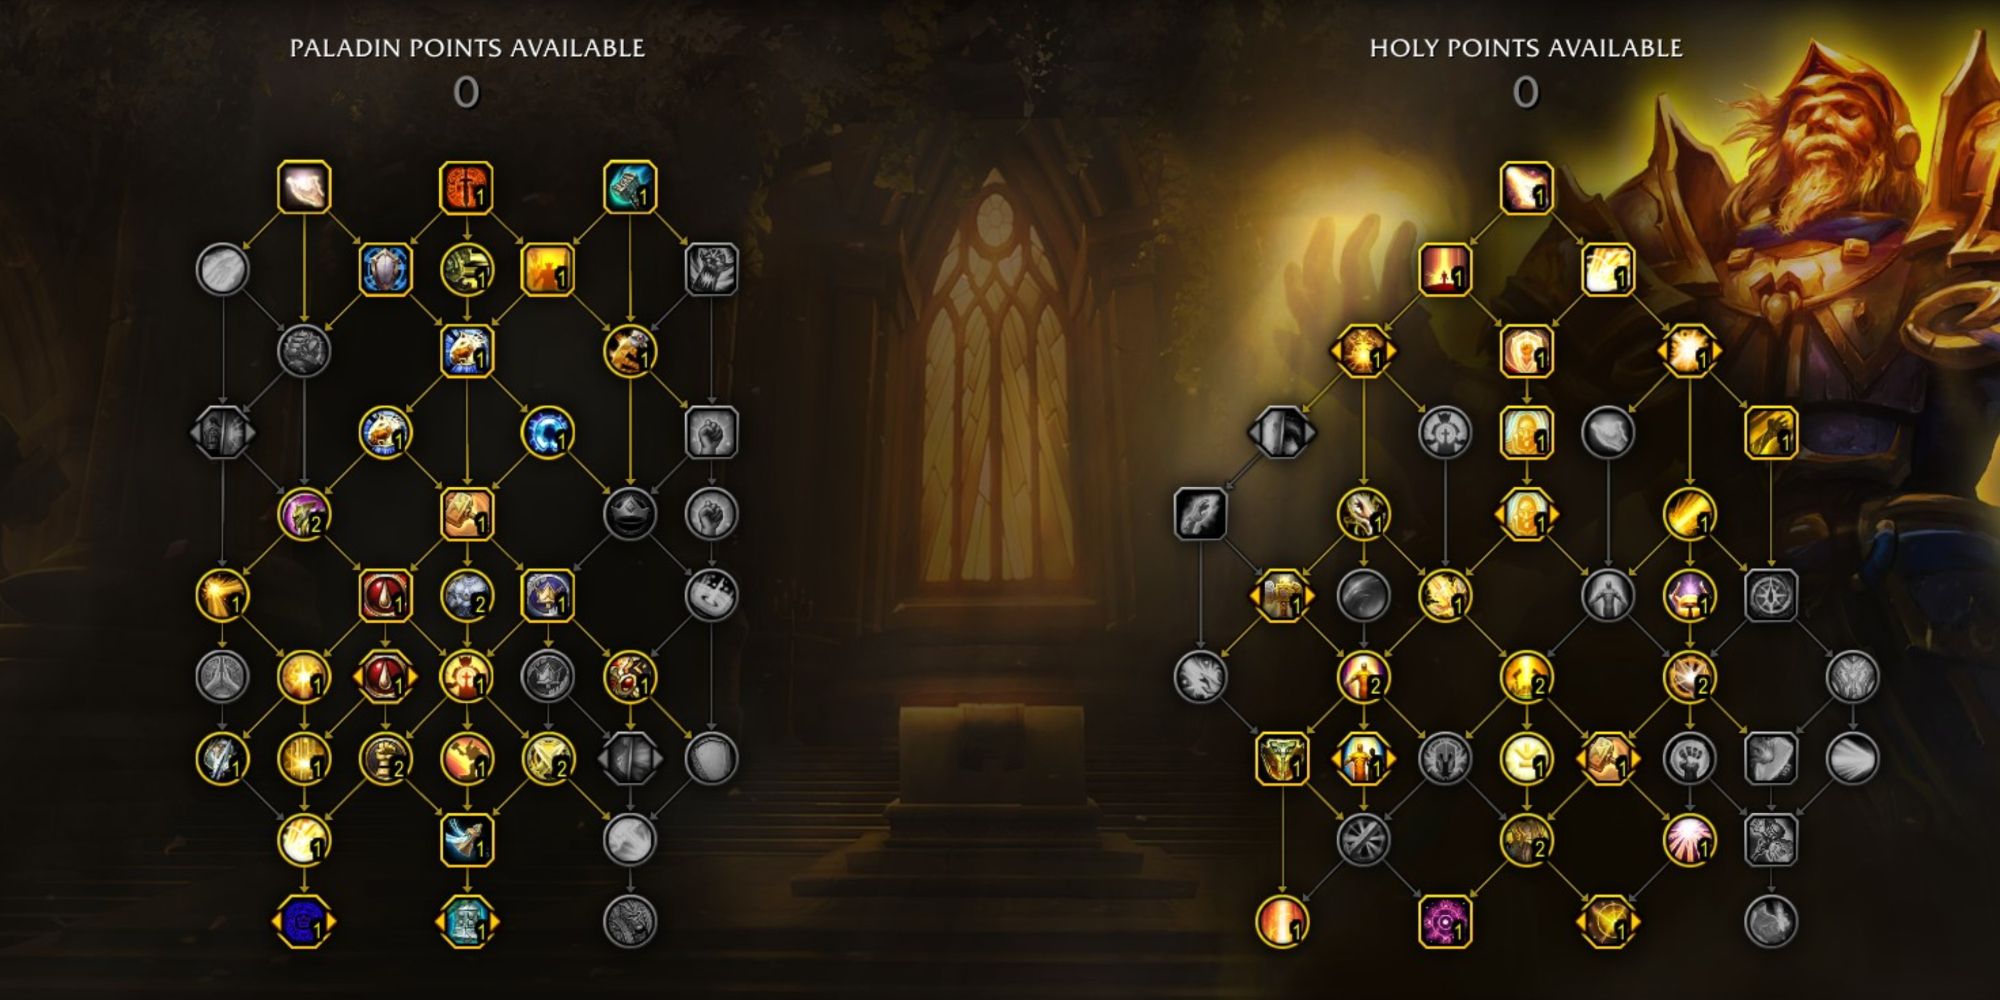 Holy Paladin Melee Build Talent Tree In Game In World Of Warcraft